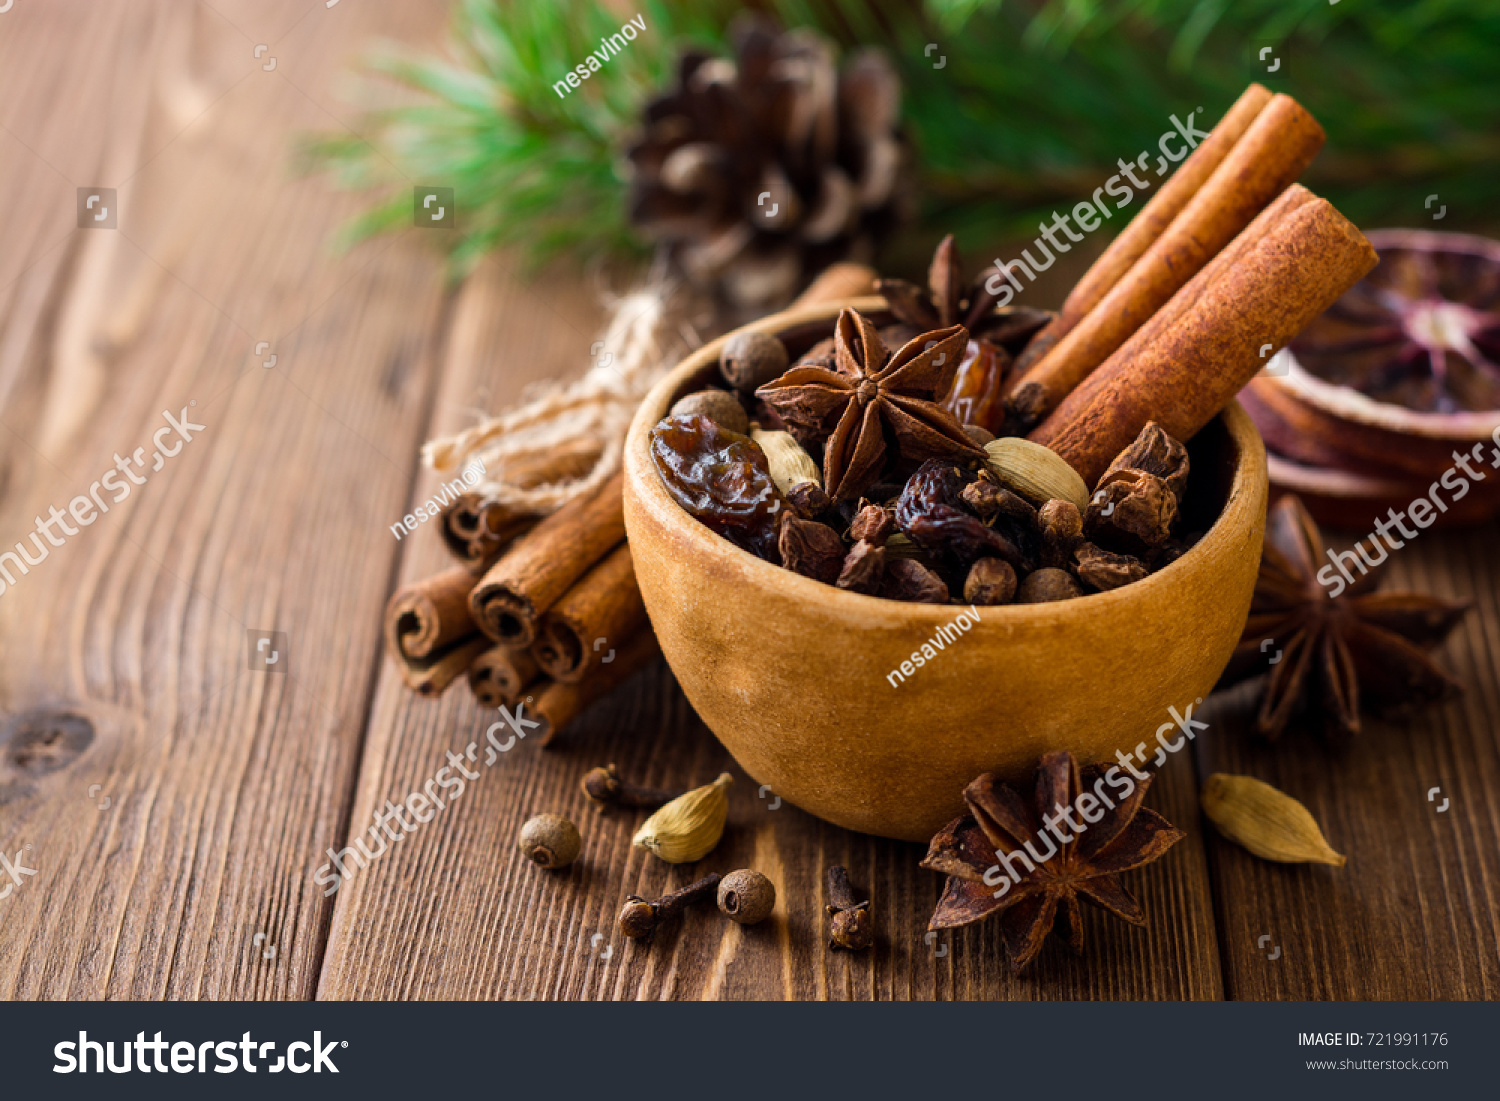 Set of spices for mulled wine in ceramic bowl on wooden table. Cinnamon sticks, star anise, cardamom, cloves, allspice and raisins. Selective focus. #721991176